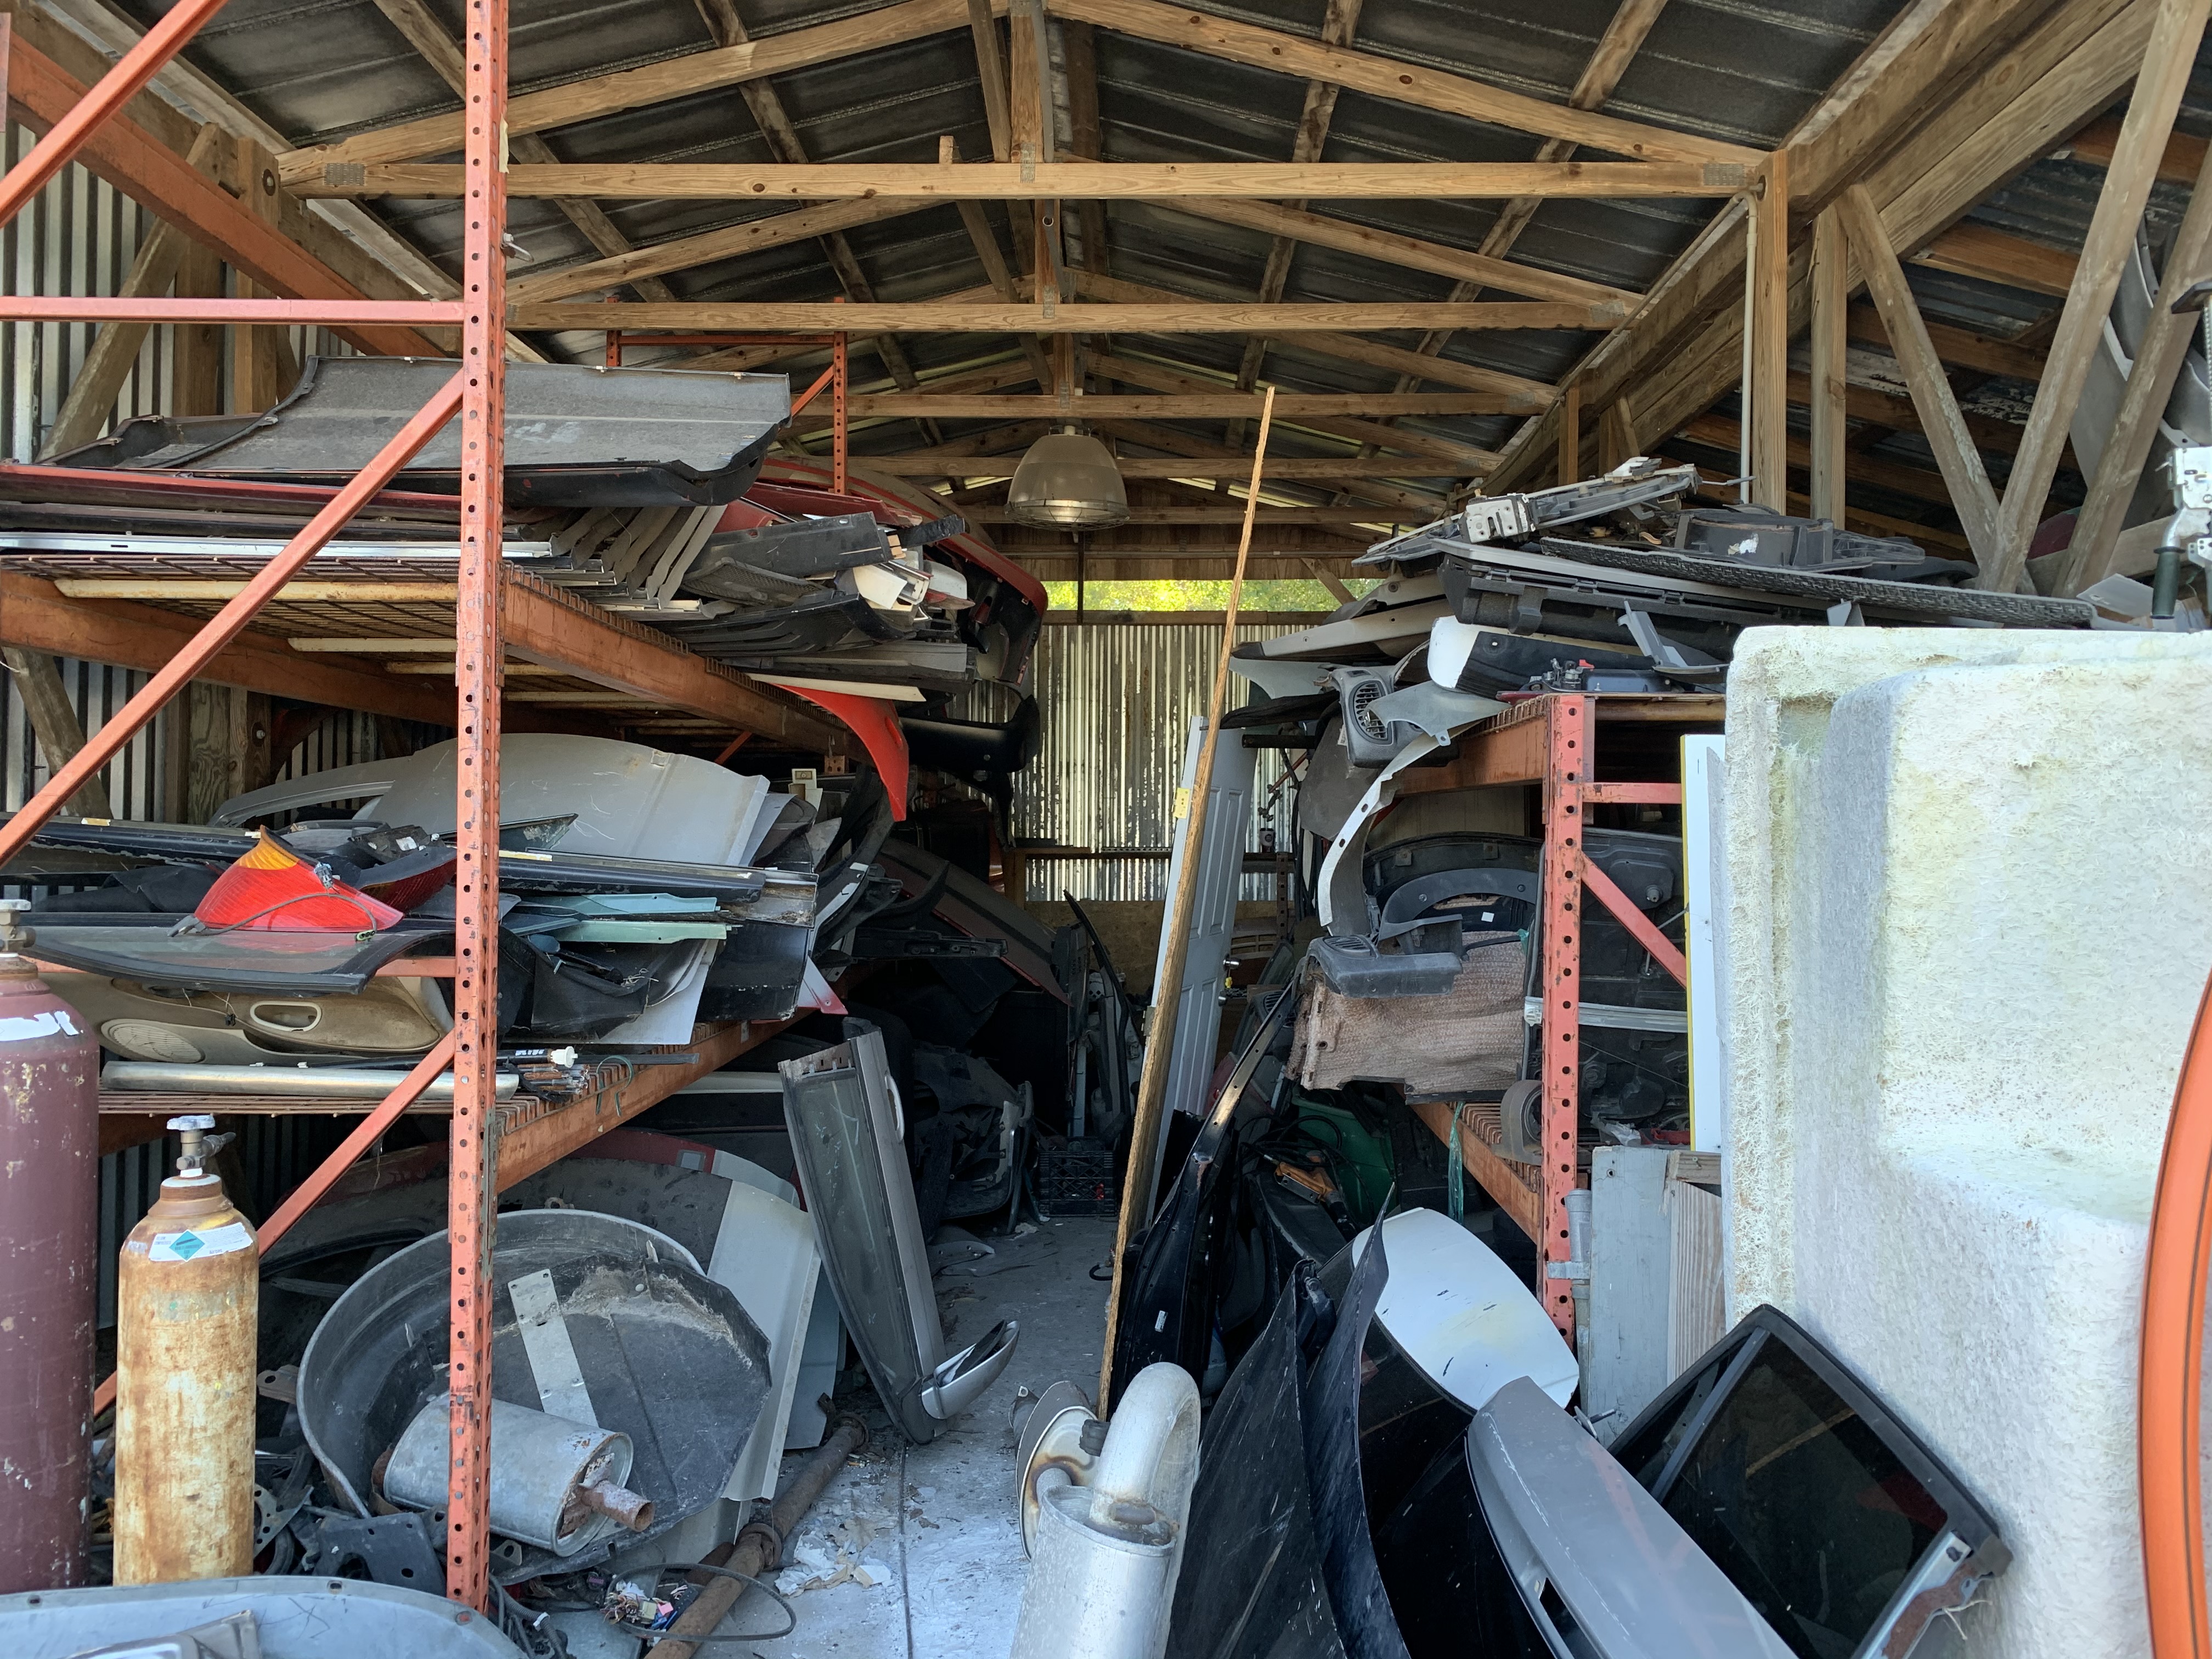 Man and Woman arrested for operating chop shop out of home